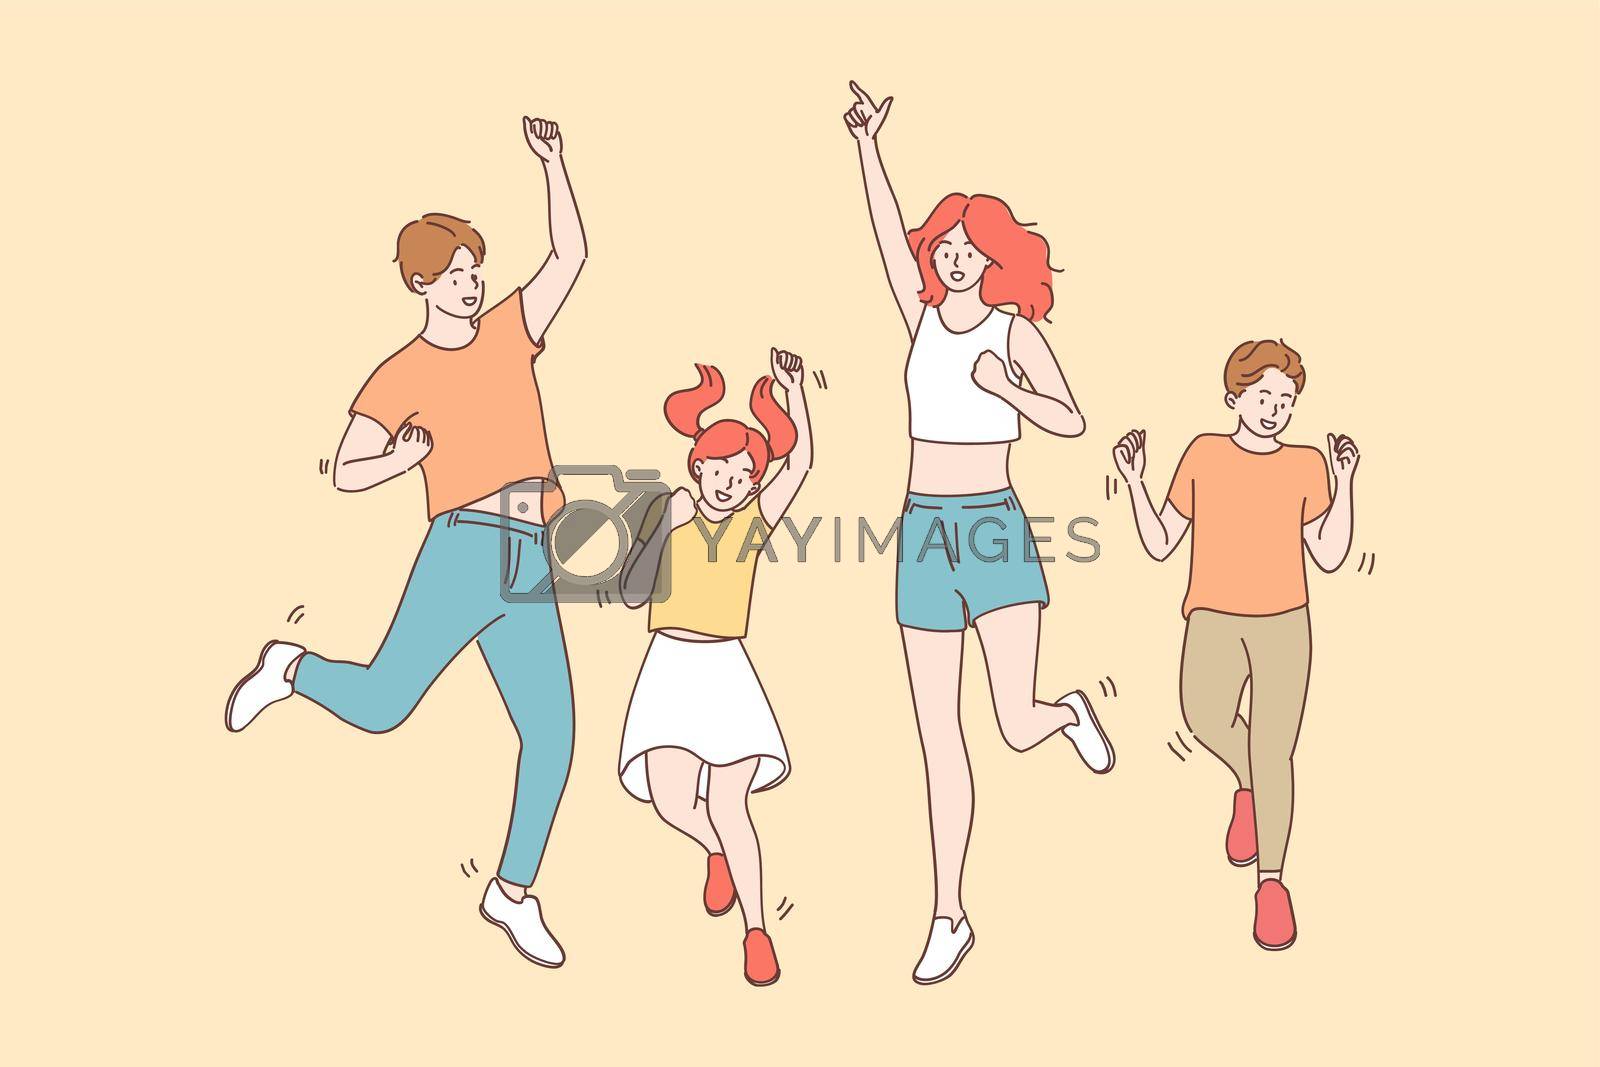 Achievement, joy, celebration concept. Happy cheerful joyful big family with children jumping together celebrating luck and feeling great having fun vector illustration